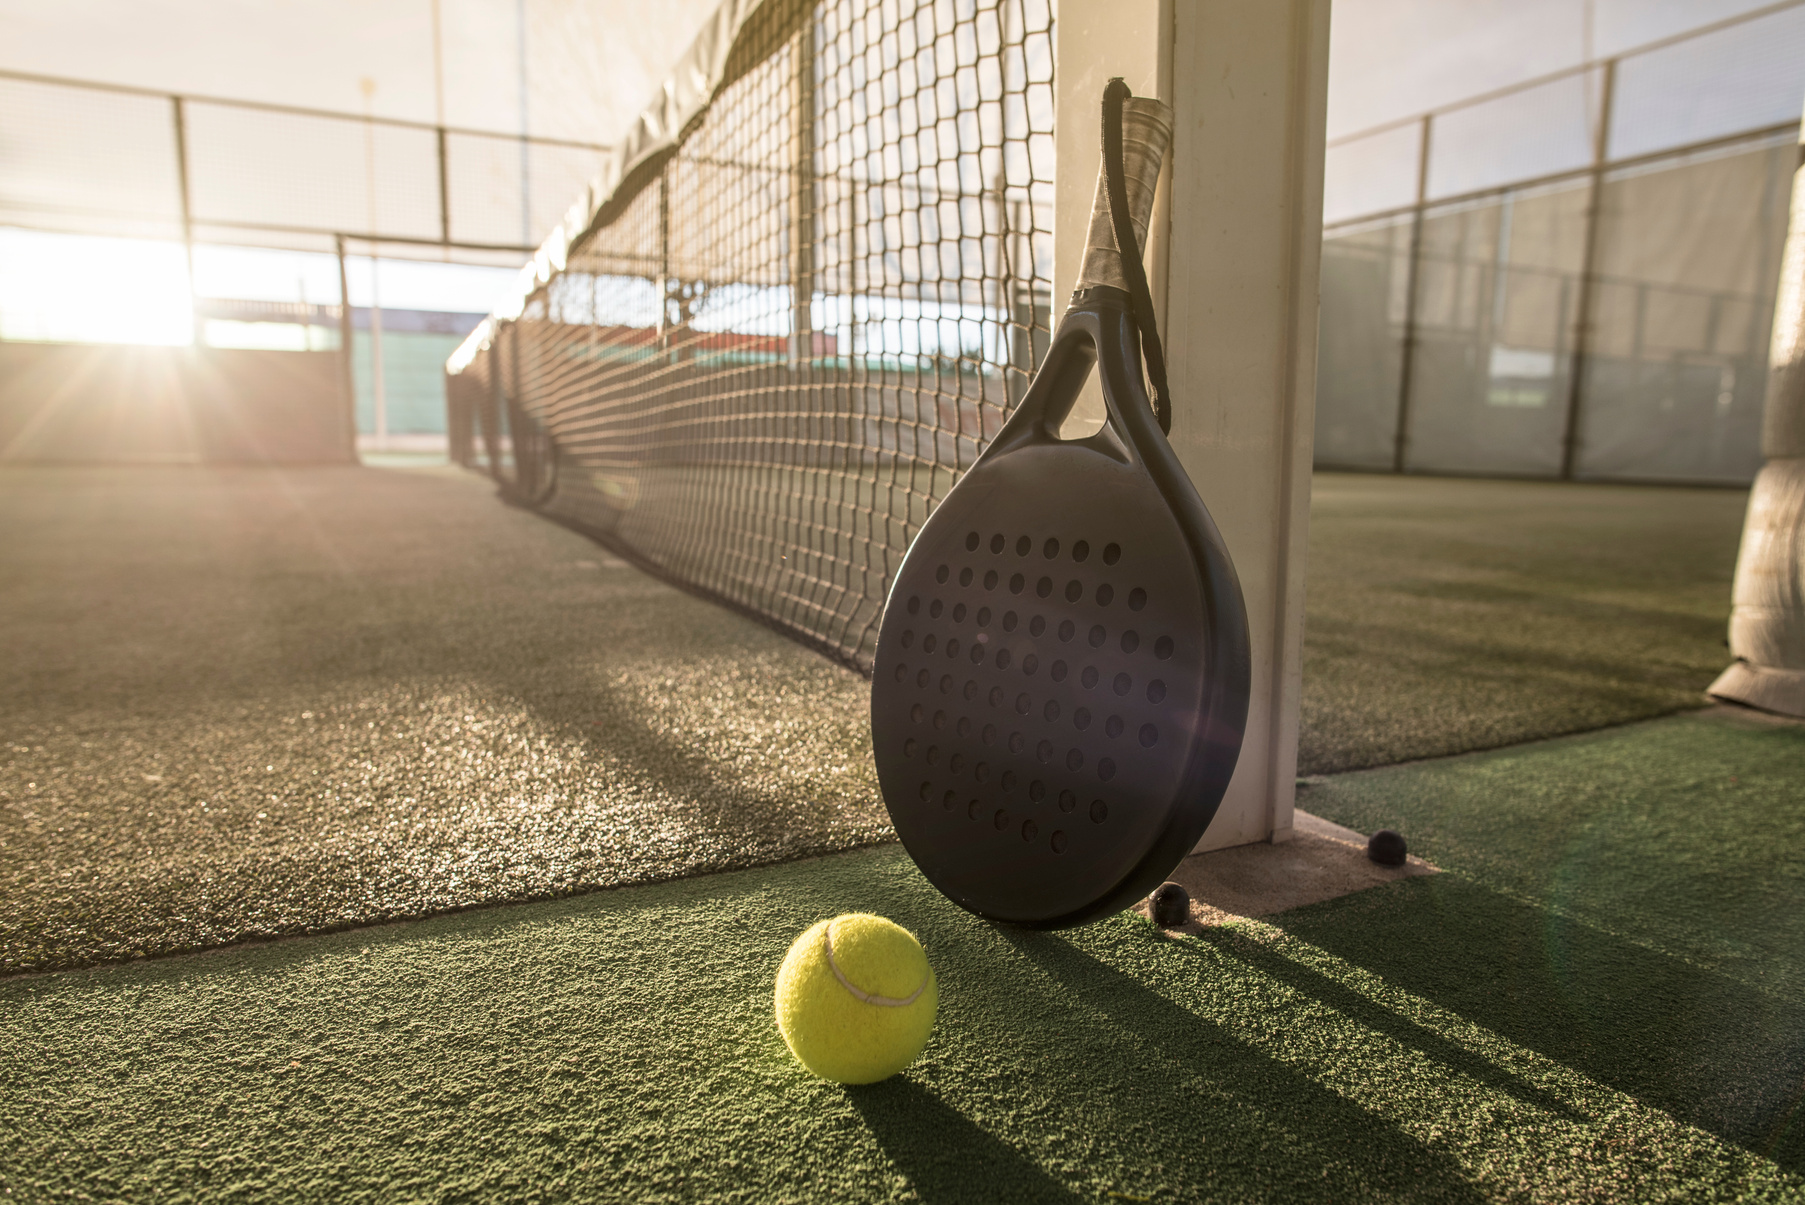 Paddle tennis racket and ball in sunset image